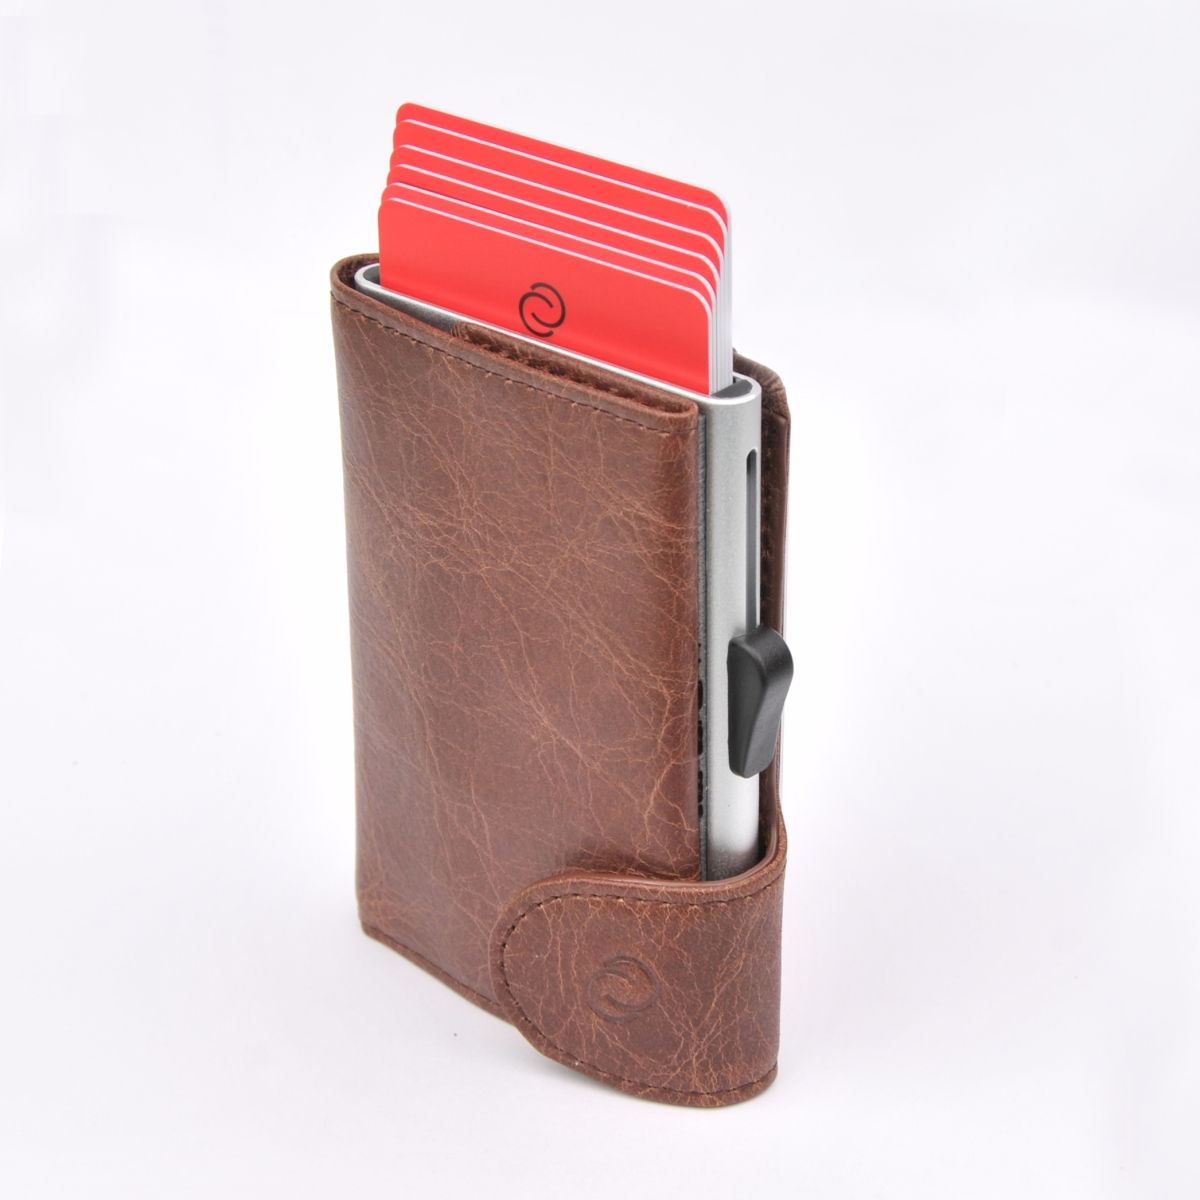 C-Secure Aluminum Card Holder with Genuine Leather - Dark Brown